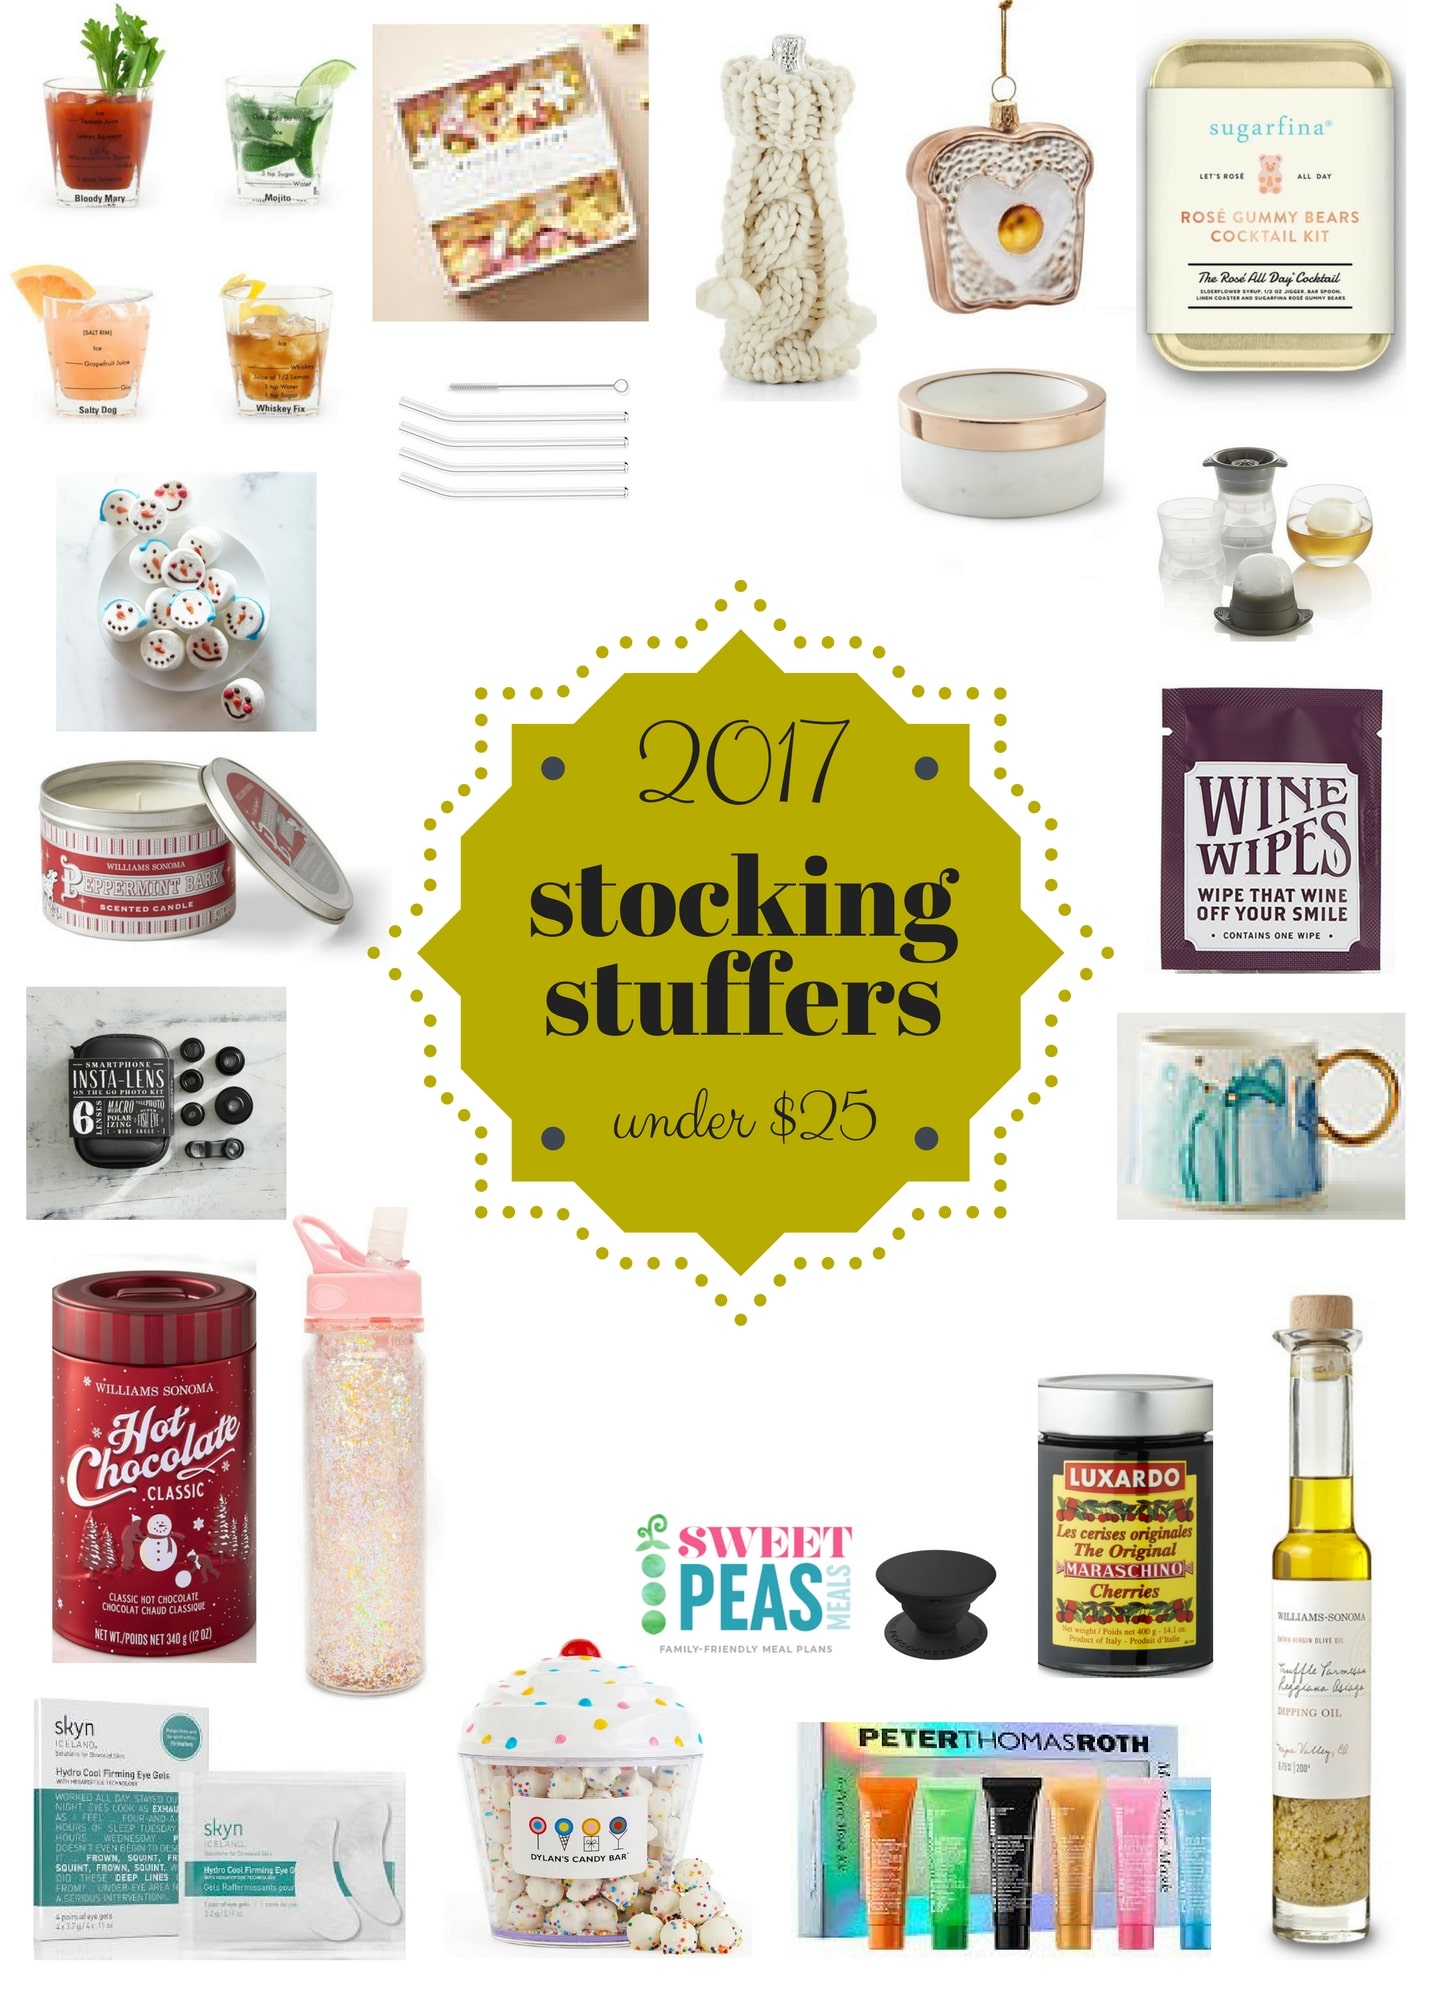 2017 stocking stuffer gifts under $25 I howsweeteats.com #giftguide #christmas #holiday